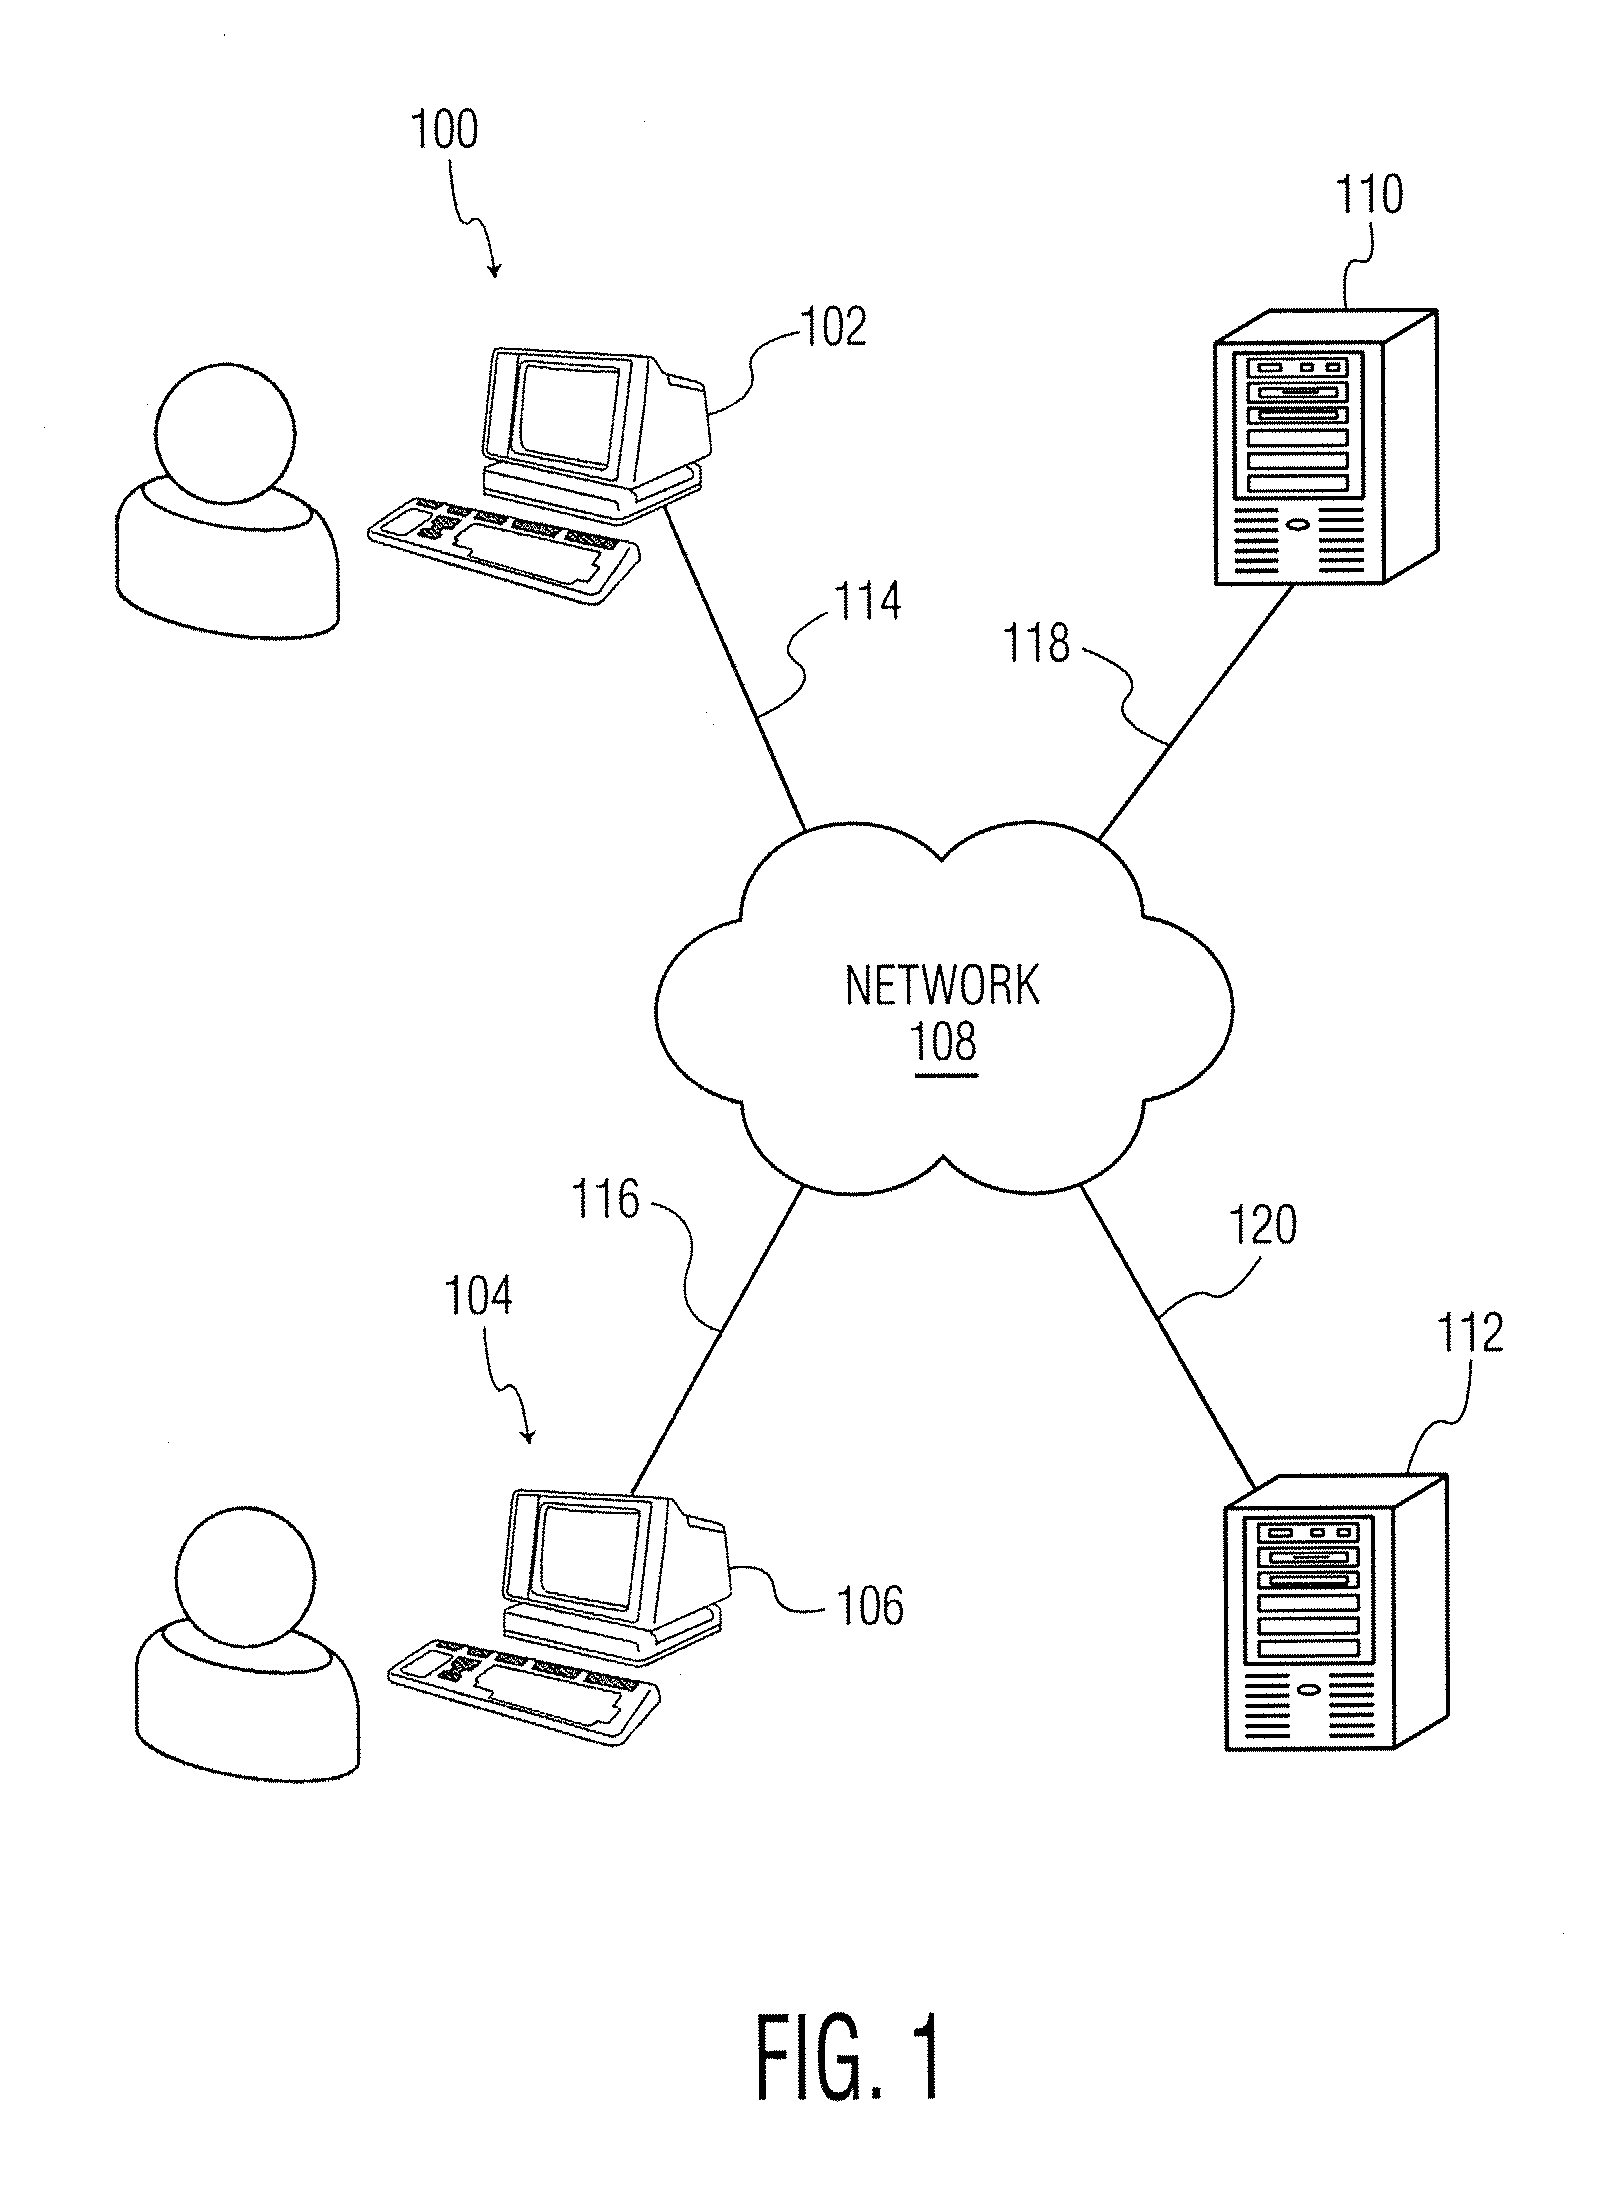 System and methods for online performance management